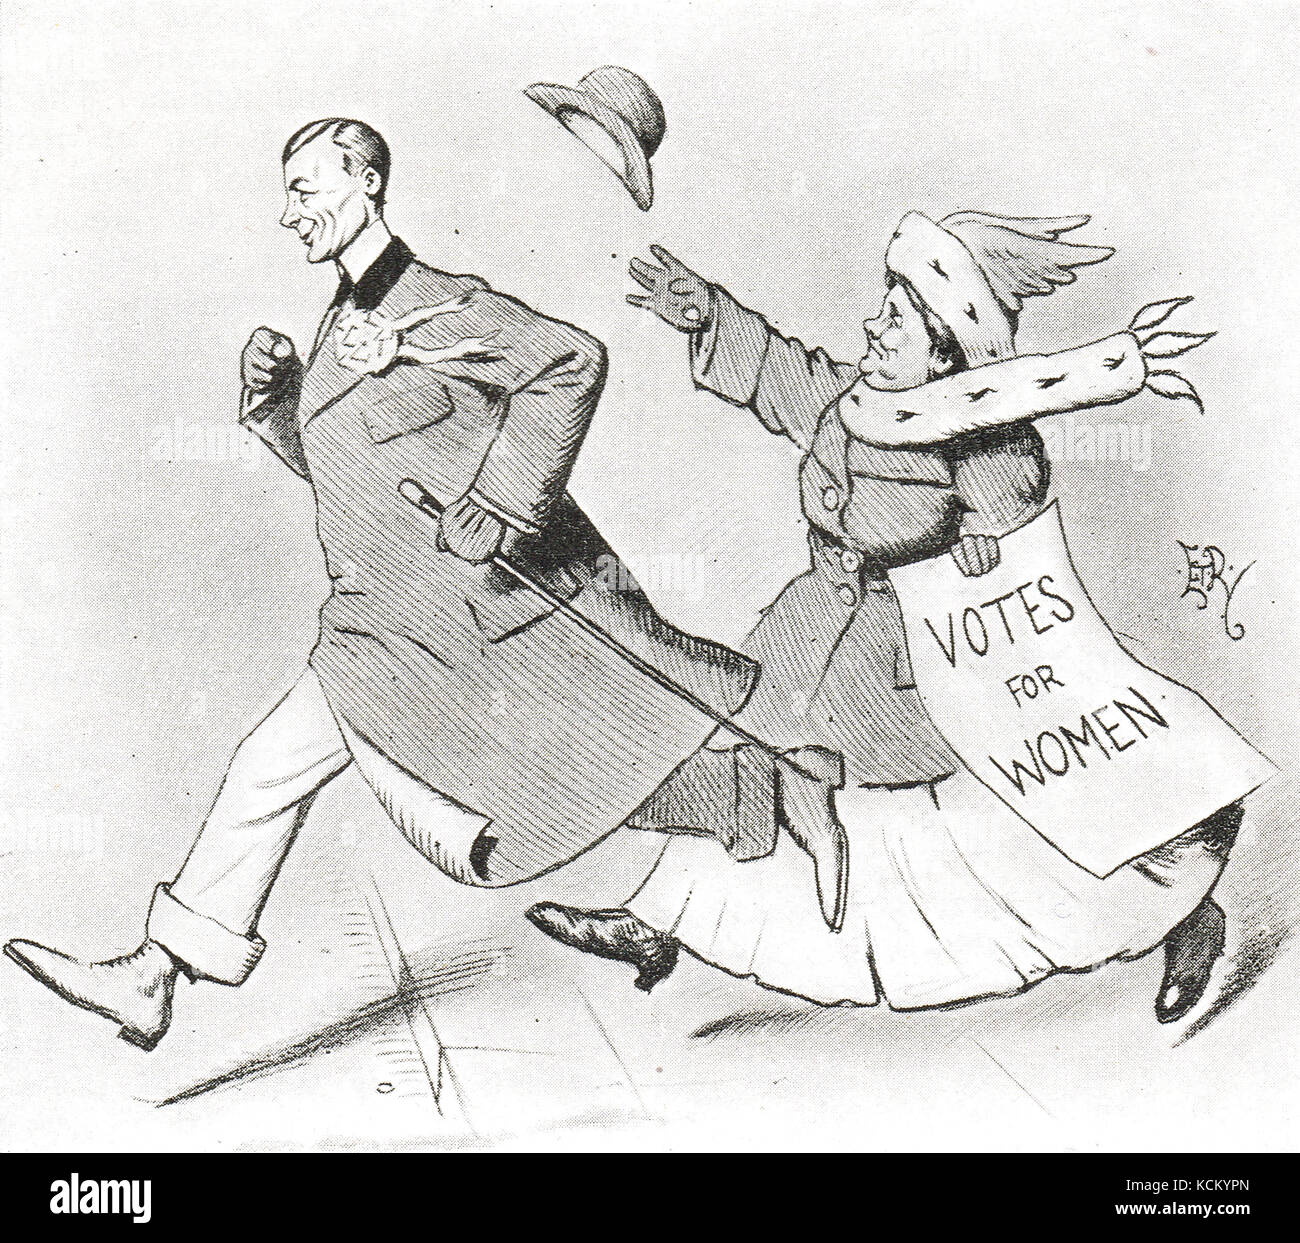 Suffragette chasing a candidate, Croydon by-election of 1909 Stock Photo